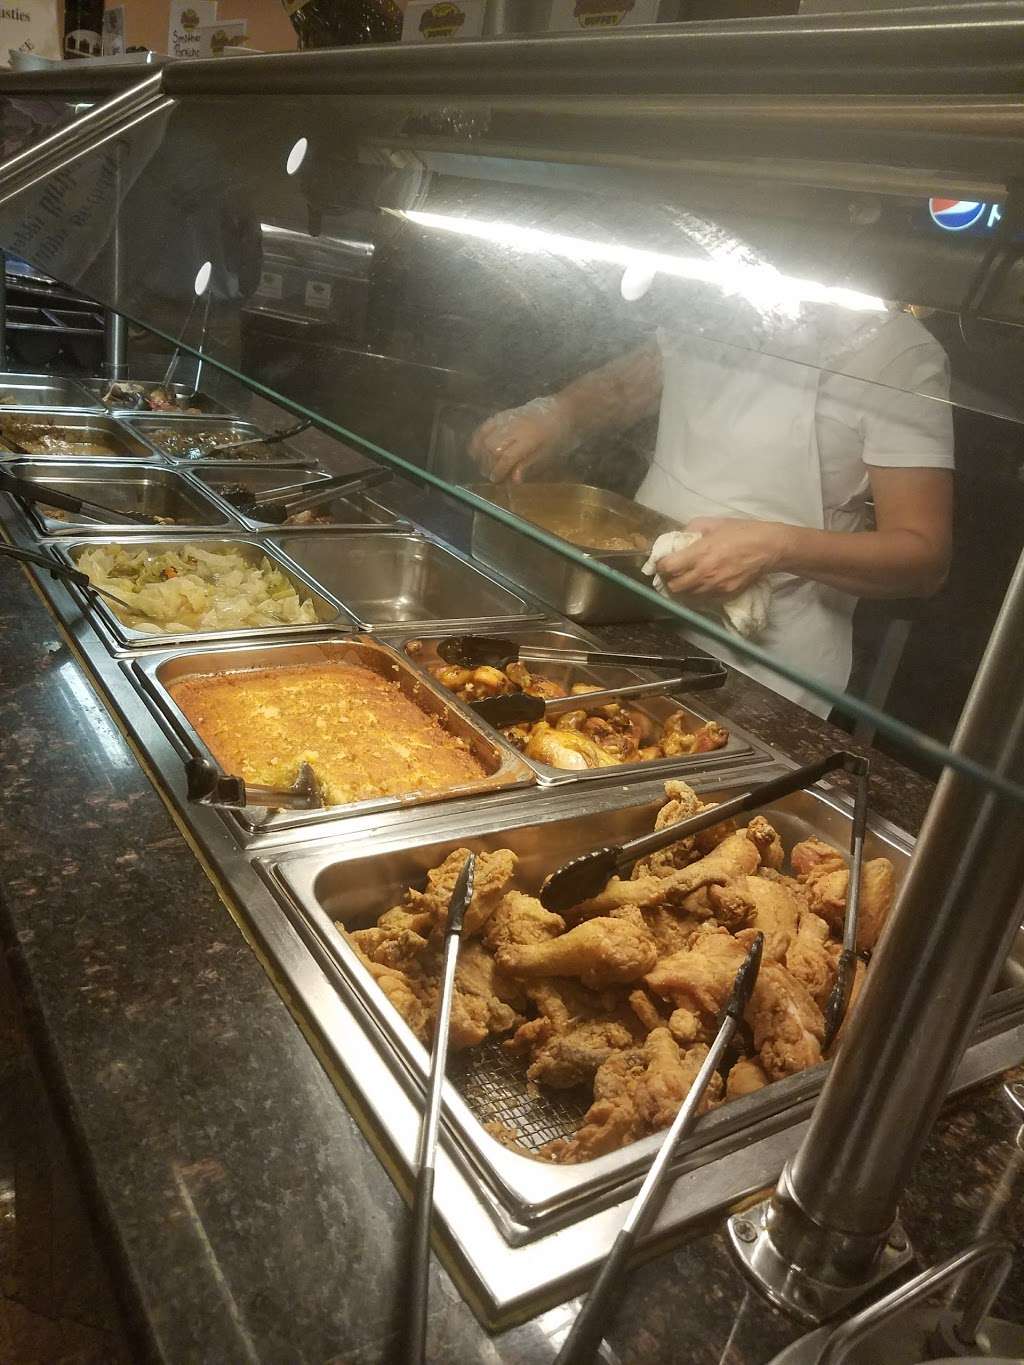 Dusties Southern Style Buffet | 4012 Lincoln Hwy, Matteson, IL 60443 | Phone: (708) 228-5500